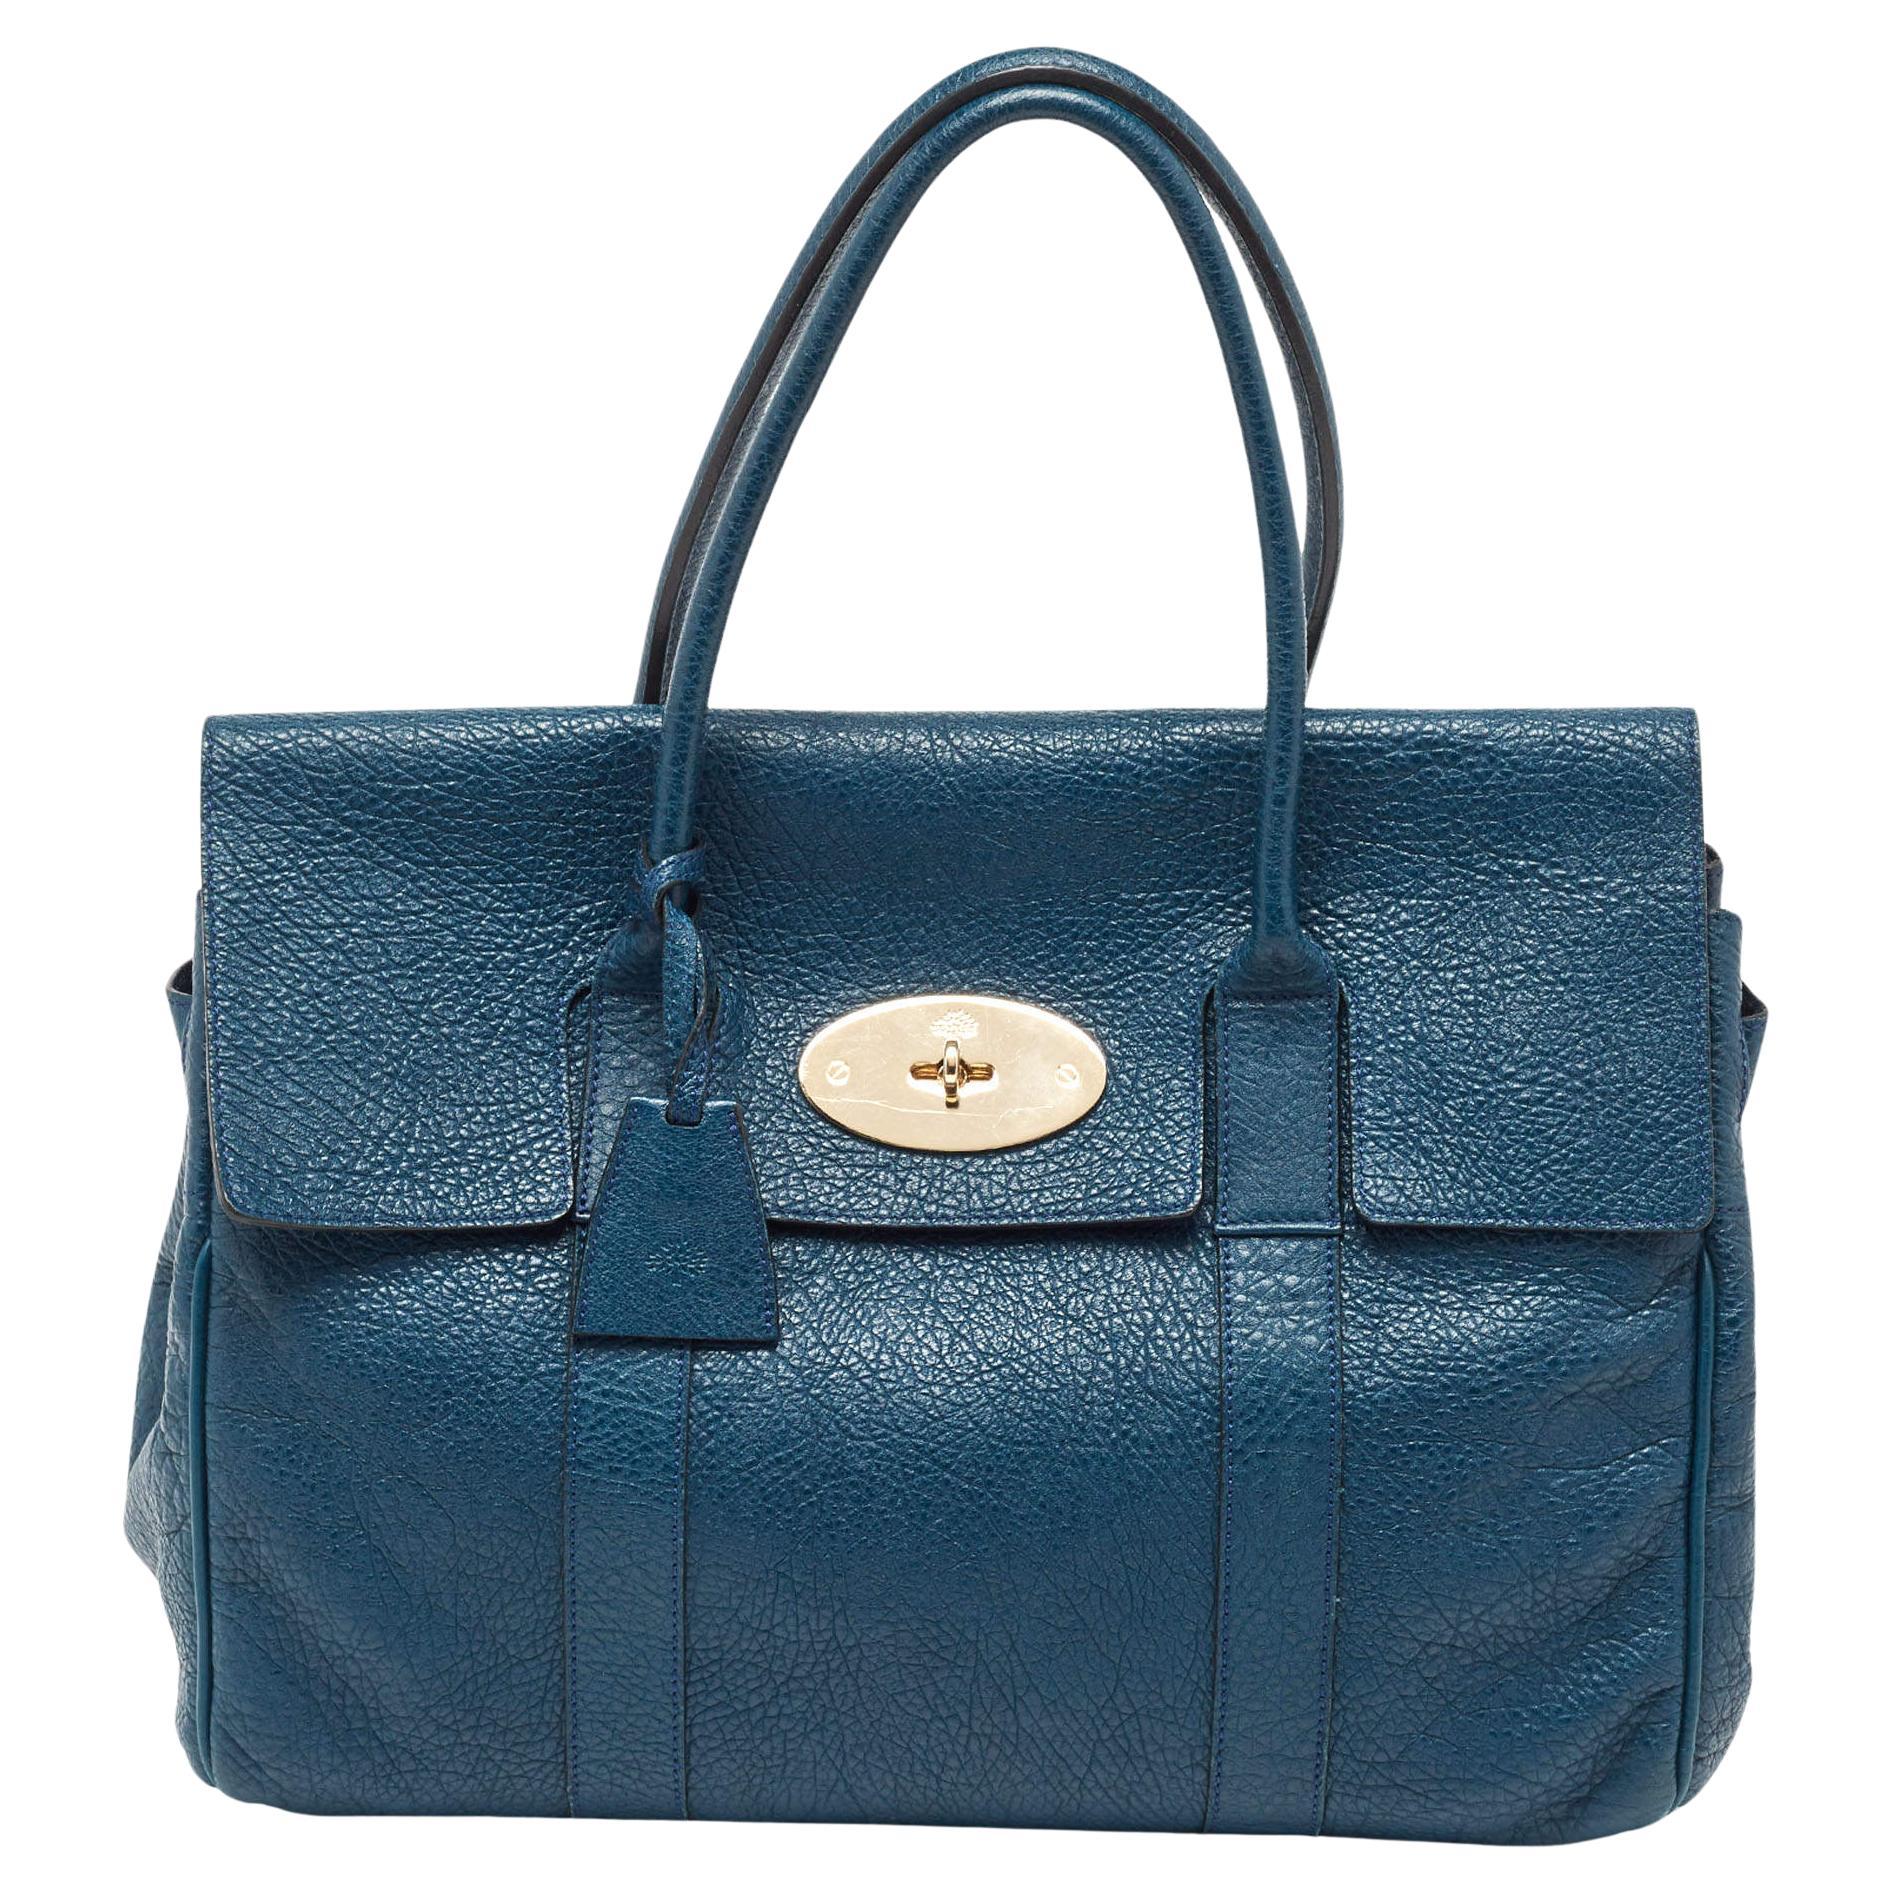 Mulberry Teal Blue Leather Bayswater Satchel For Sale